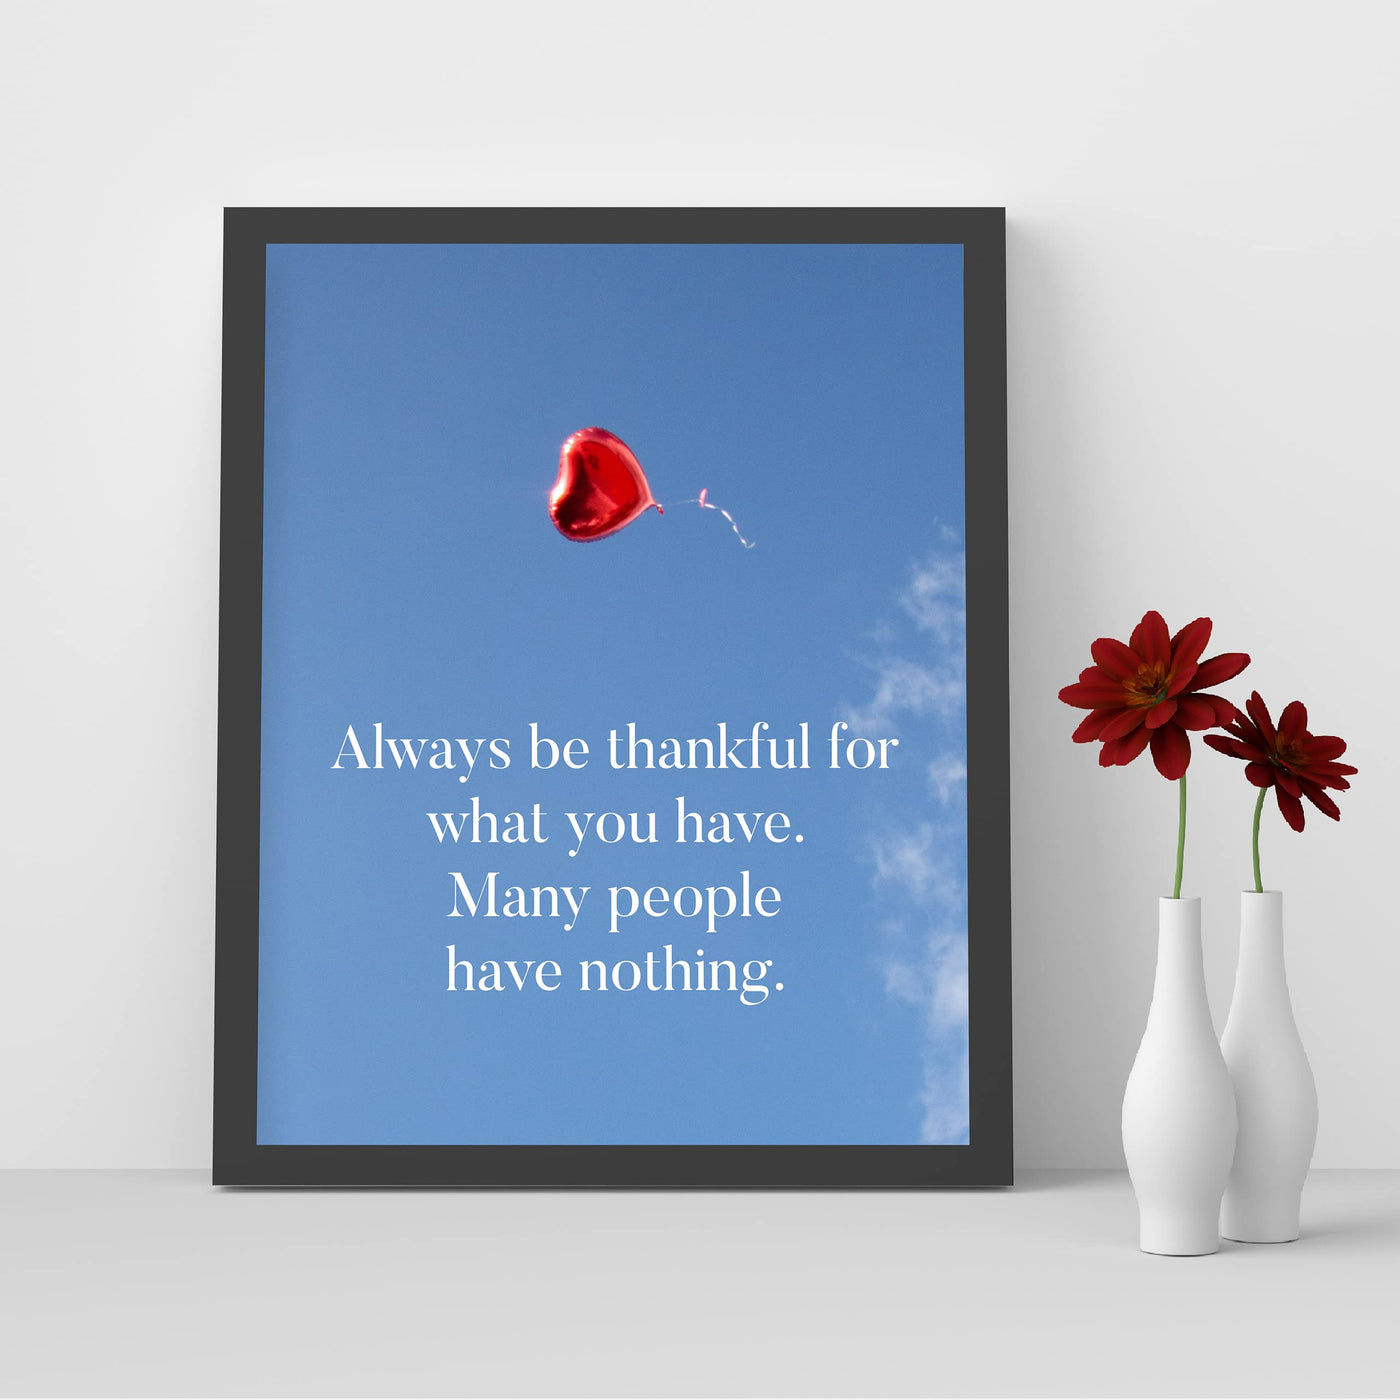 Always Be Thankful for What You Have Inspirational Quotes Wall Decor -8x10" Motivational Art Print w/Heart Balloon Image-Ready to Frame. Home-Office-School-Work Decor. Great Reminder of Gratitude!